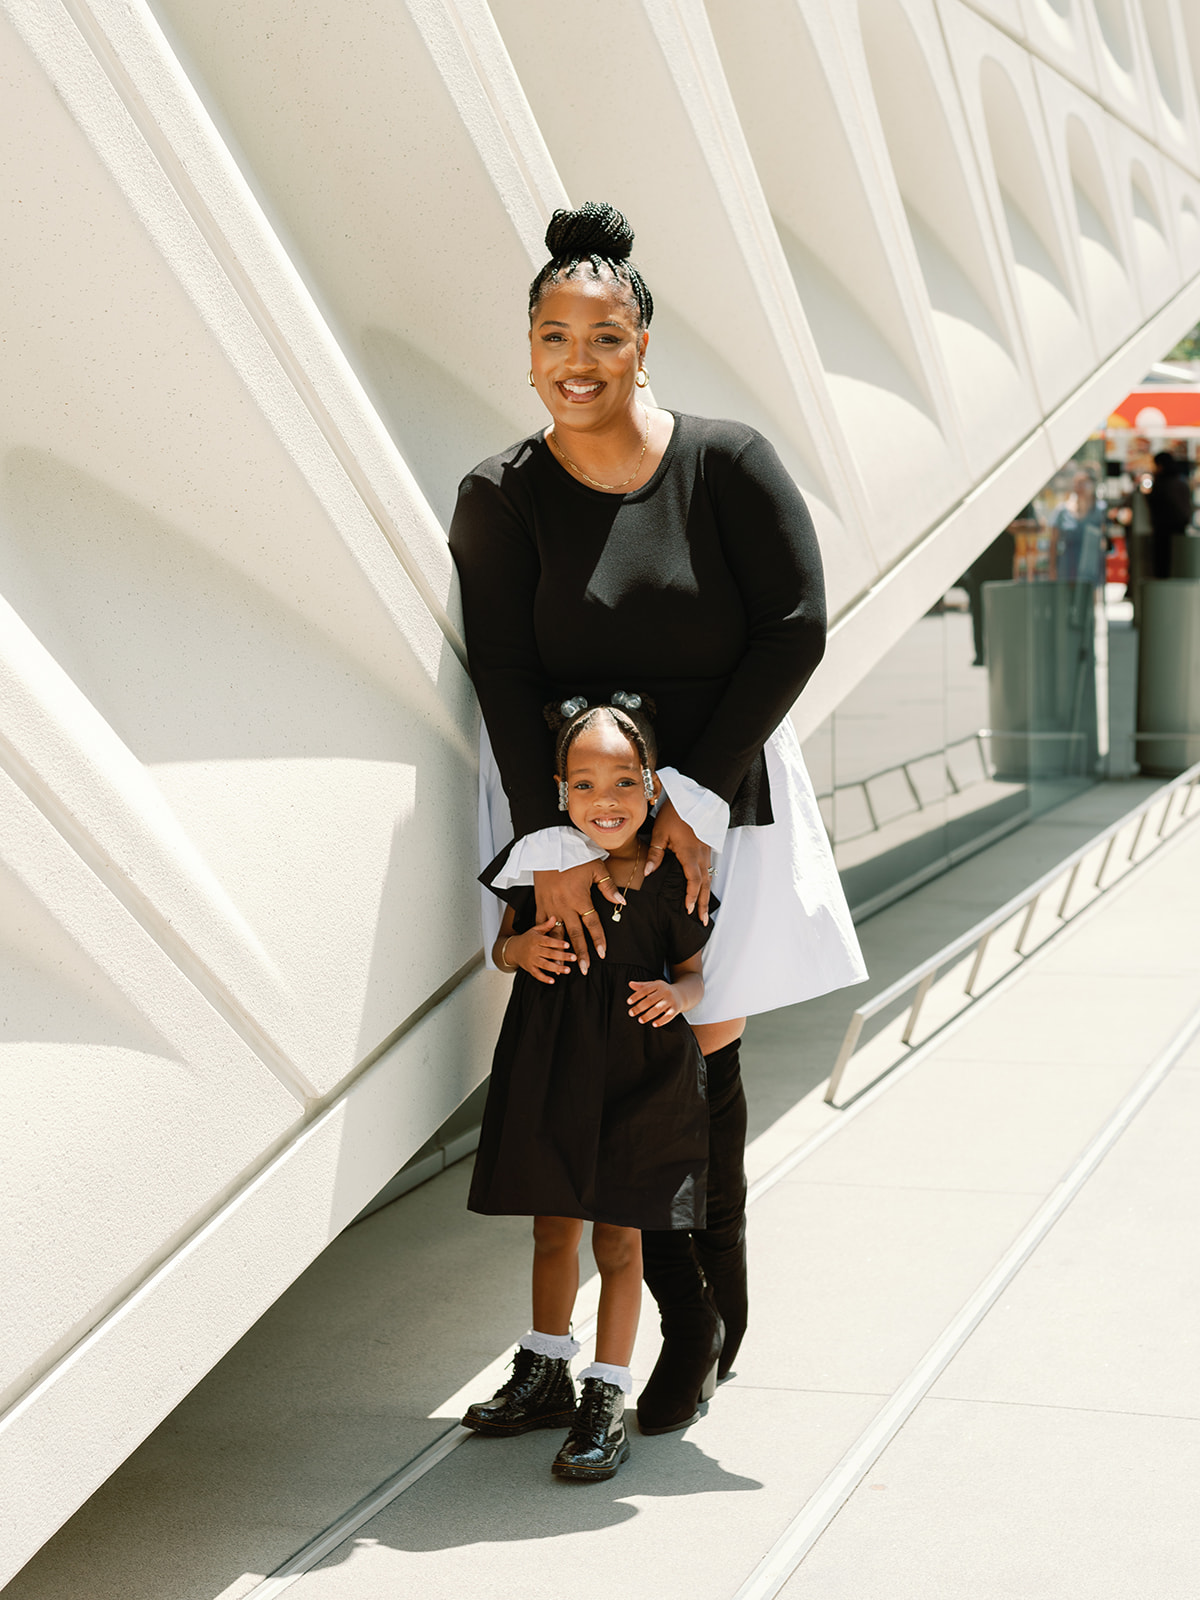 Mother & Daughter Portrait Session in Downtown Los Angeles, CA.   Walt Disney Concert Hall and The Broad Museum